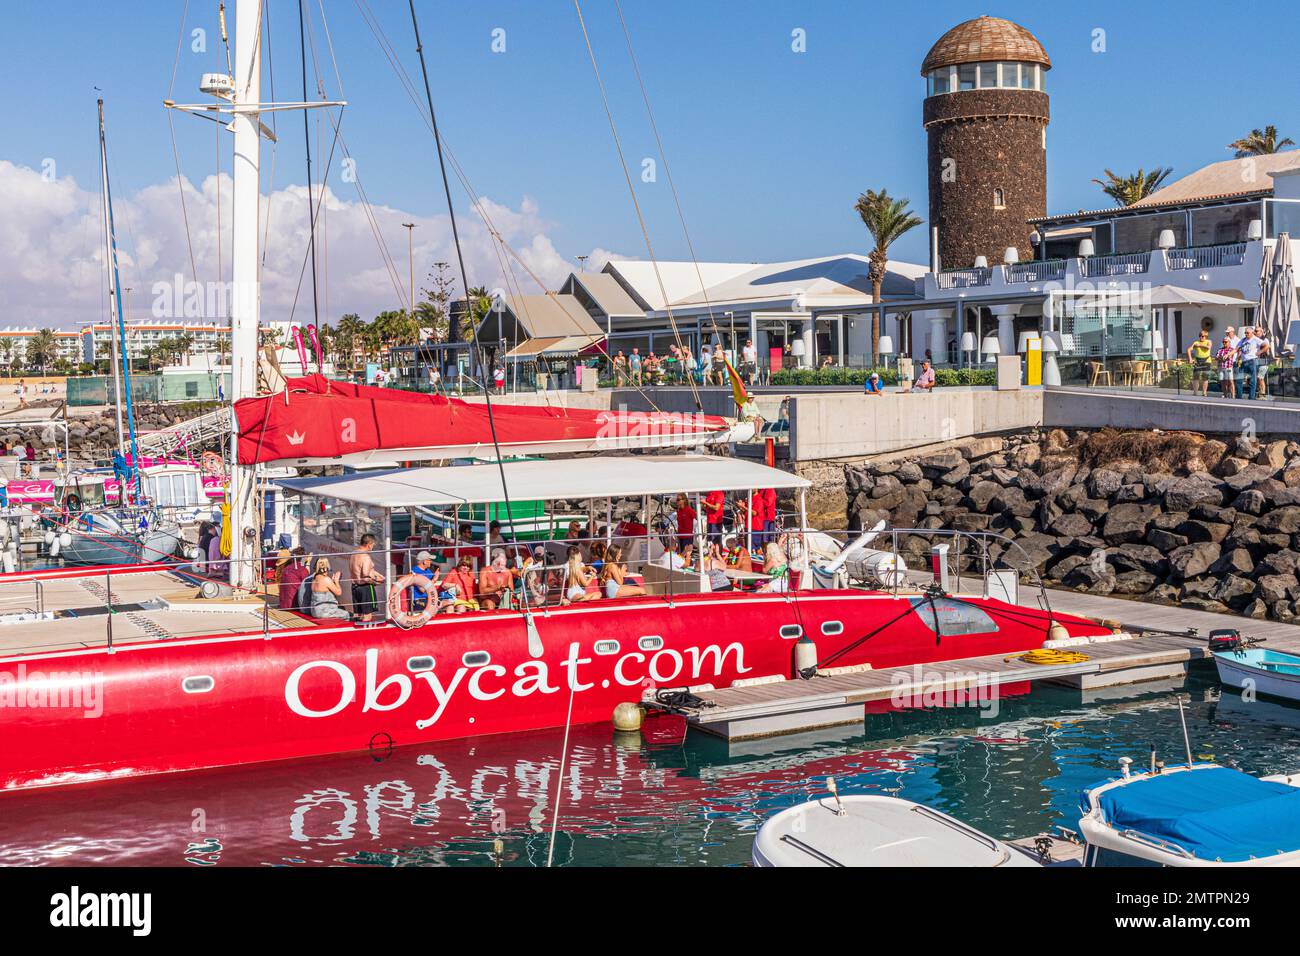 Tourists aboard the Obycat Experience catamaran in the harbour at Caleta de Fuste on the east coast of the Canary Island of Fuerteventura, Spain Stock Photo